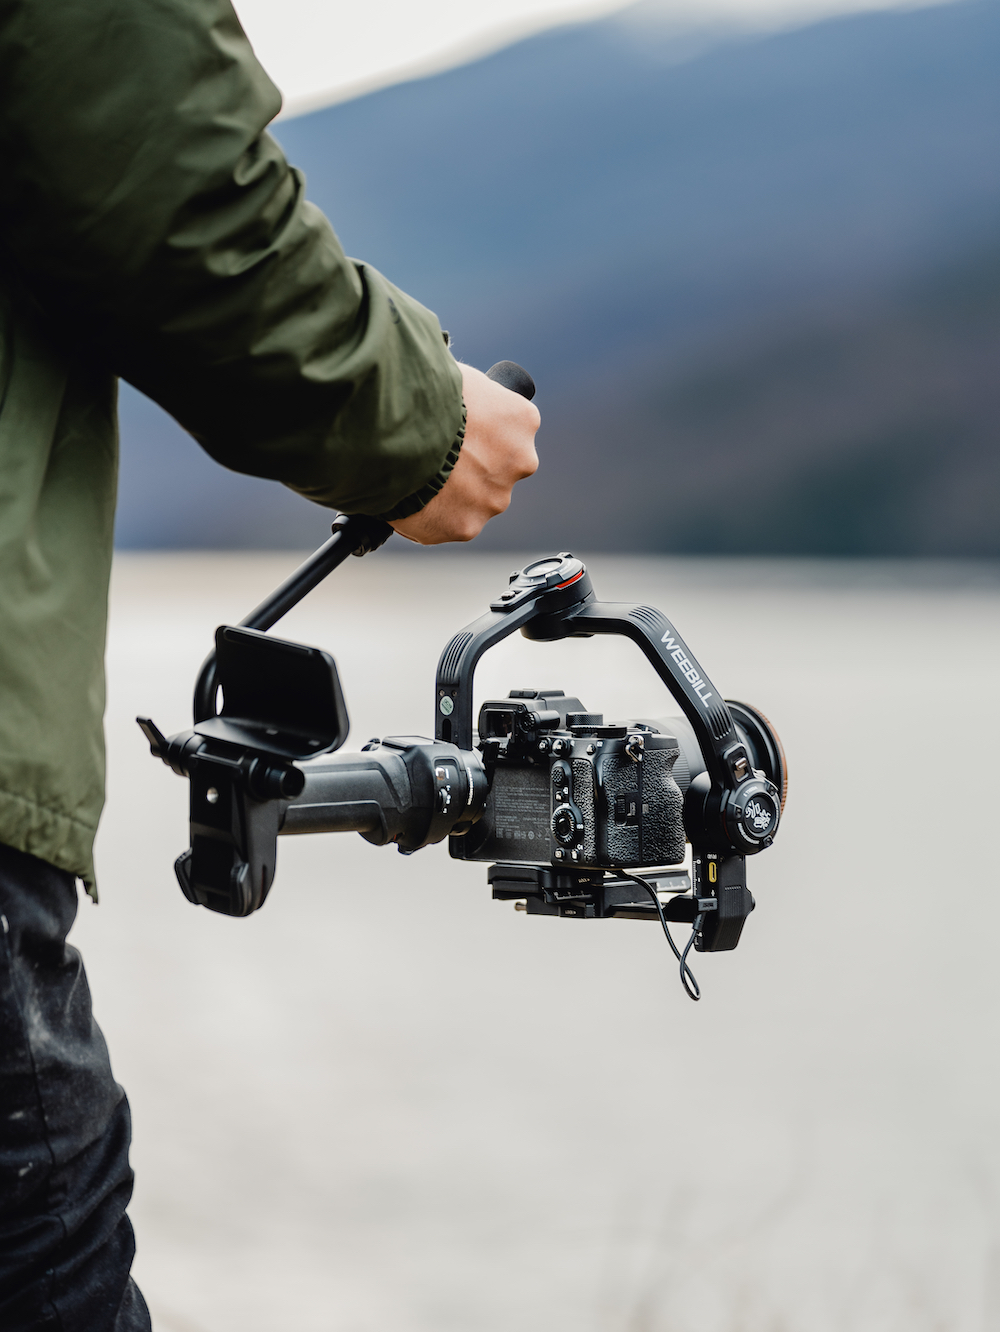 The Zhiyun WEEBILL 3 gimbal in use on location